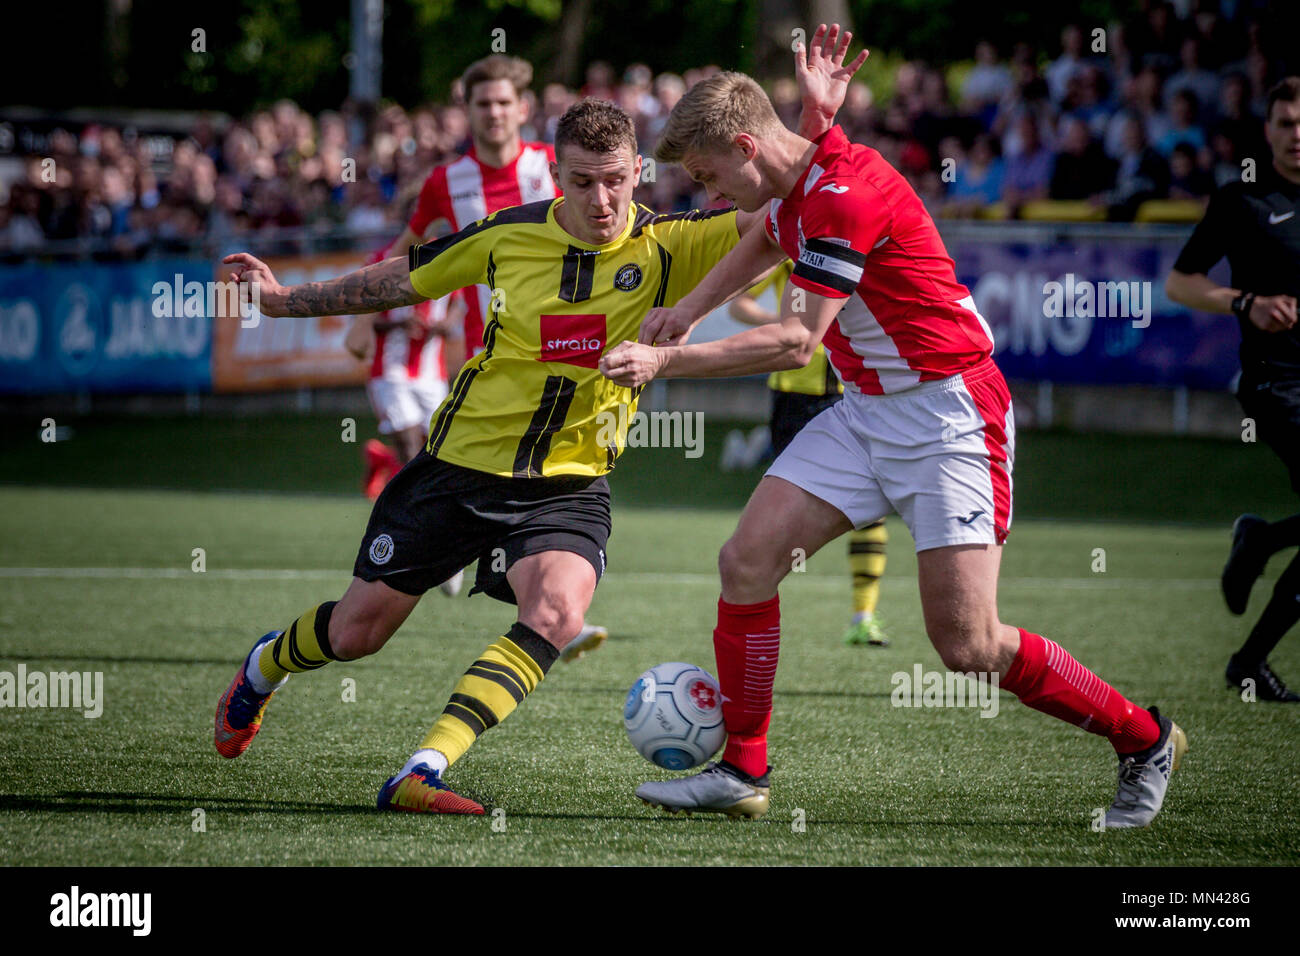 Harrogate, Yorkshire, UK. 13th May, 2018. News: Harrogate Town Promoted to the National League, The CNG Stadium, Harrogate North Yorkshire, UK. 13 May 2018.   Joe Leesley (Harrogate Town) runs at Gareth Dean (Captain) (Brackley Town) and beats him to get a shot in on goal.  Harrogate Town 3-0 Brackley Town - National League North playoff final at the CNG Stadium in Harrogate. Harrogate are promoted to the National League for the 2018/19 season. Credit: Caught Light Photography Limited/Alamy Live News Stock Photo